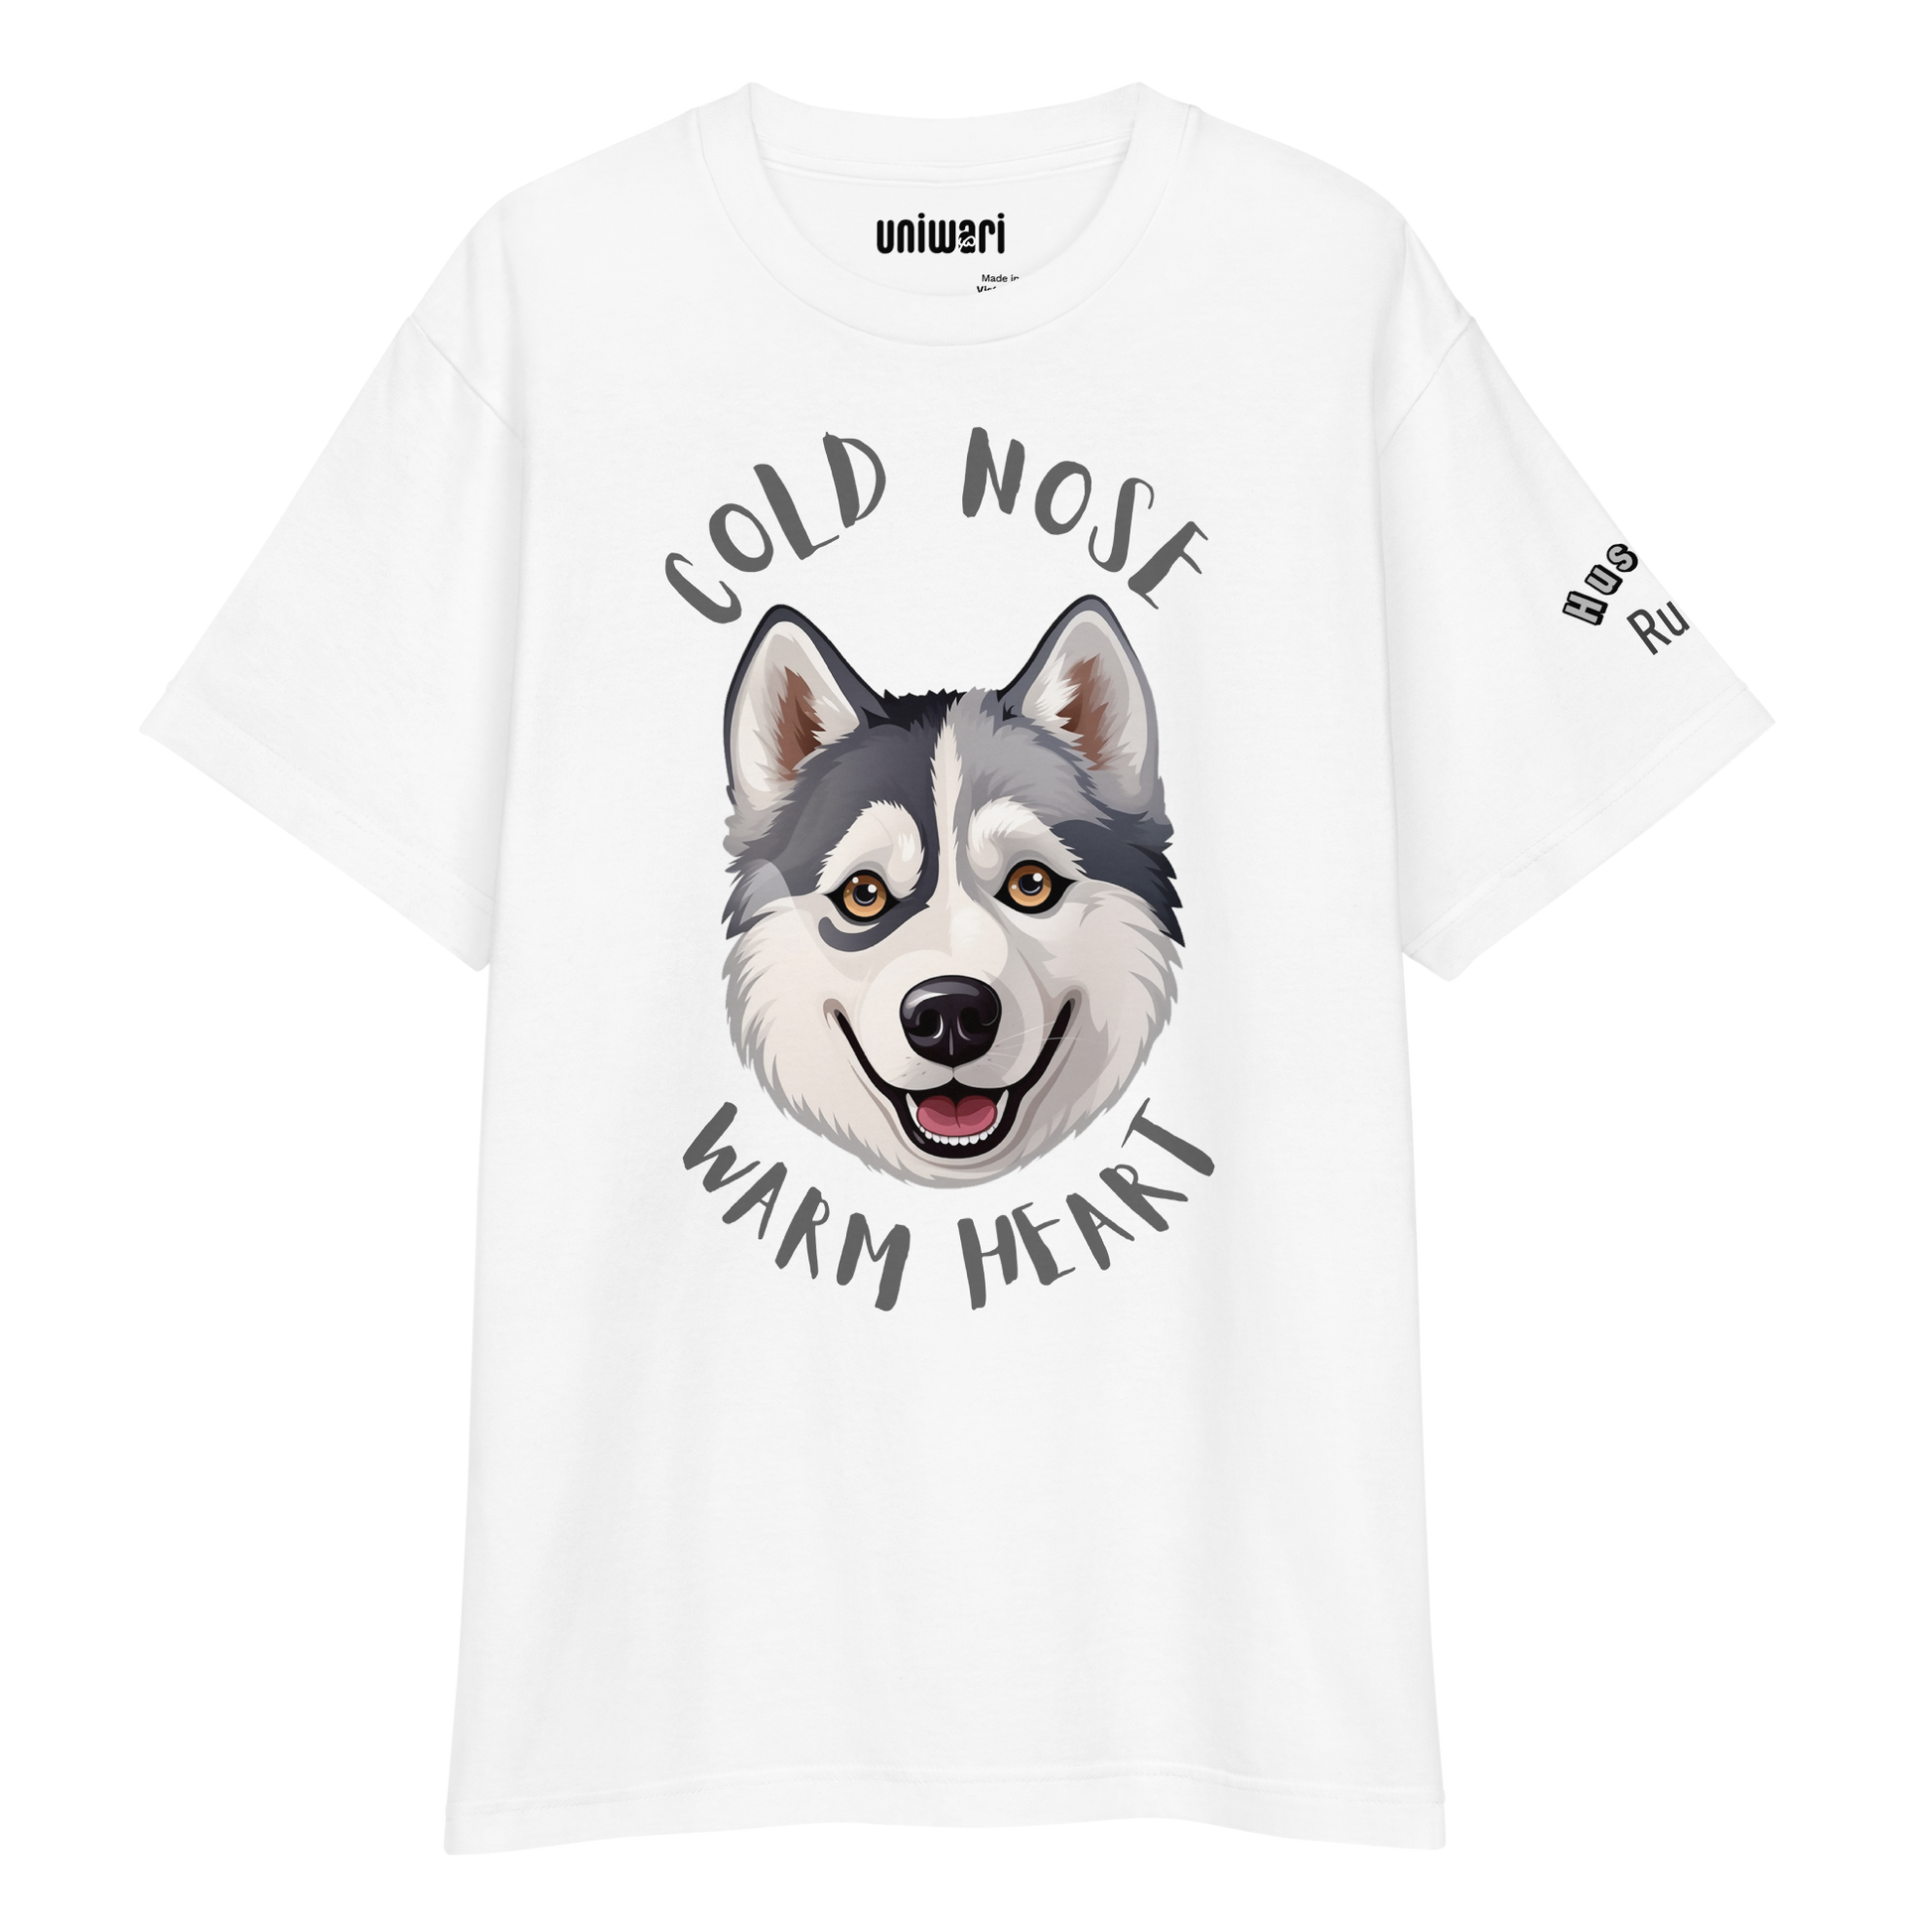 White High Quality Tee - Front Design with a stamp of a Husky and the phrase "cold nose warm heart" - Left Shoulder with phrase "Husky Rules"